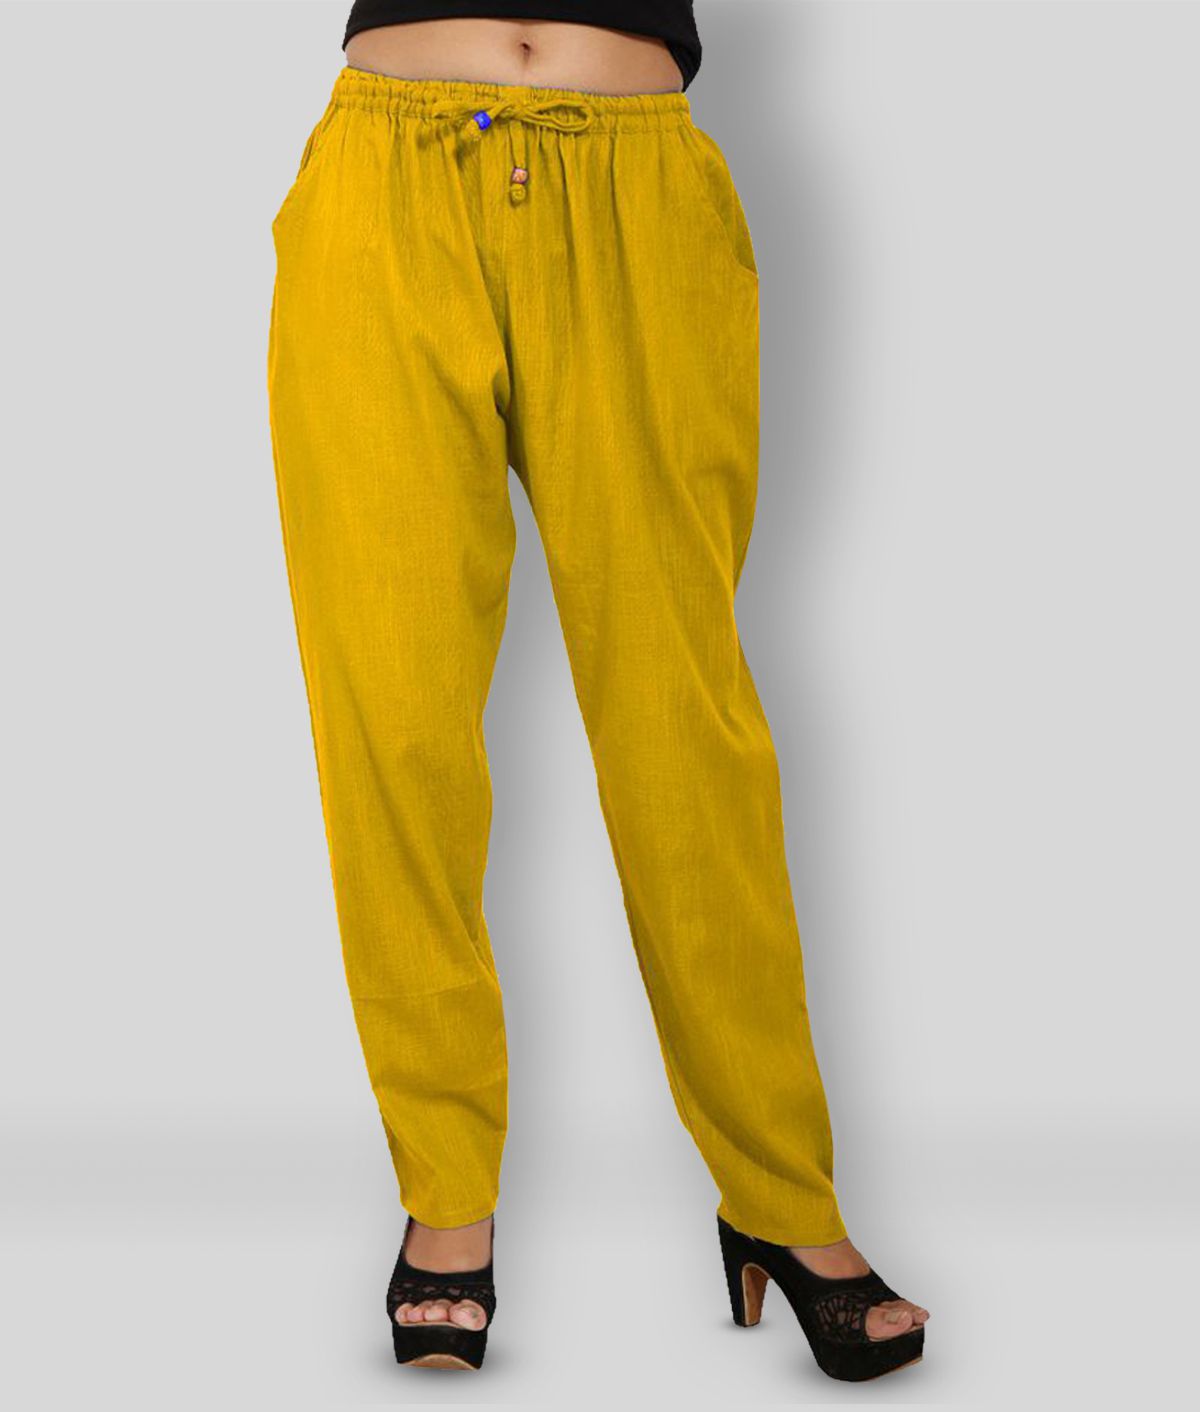     			Lee Moda - Yellow Cotton  Fit Women's Casual Pants  ( Pack of 1 )